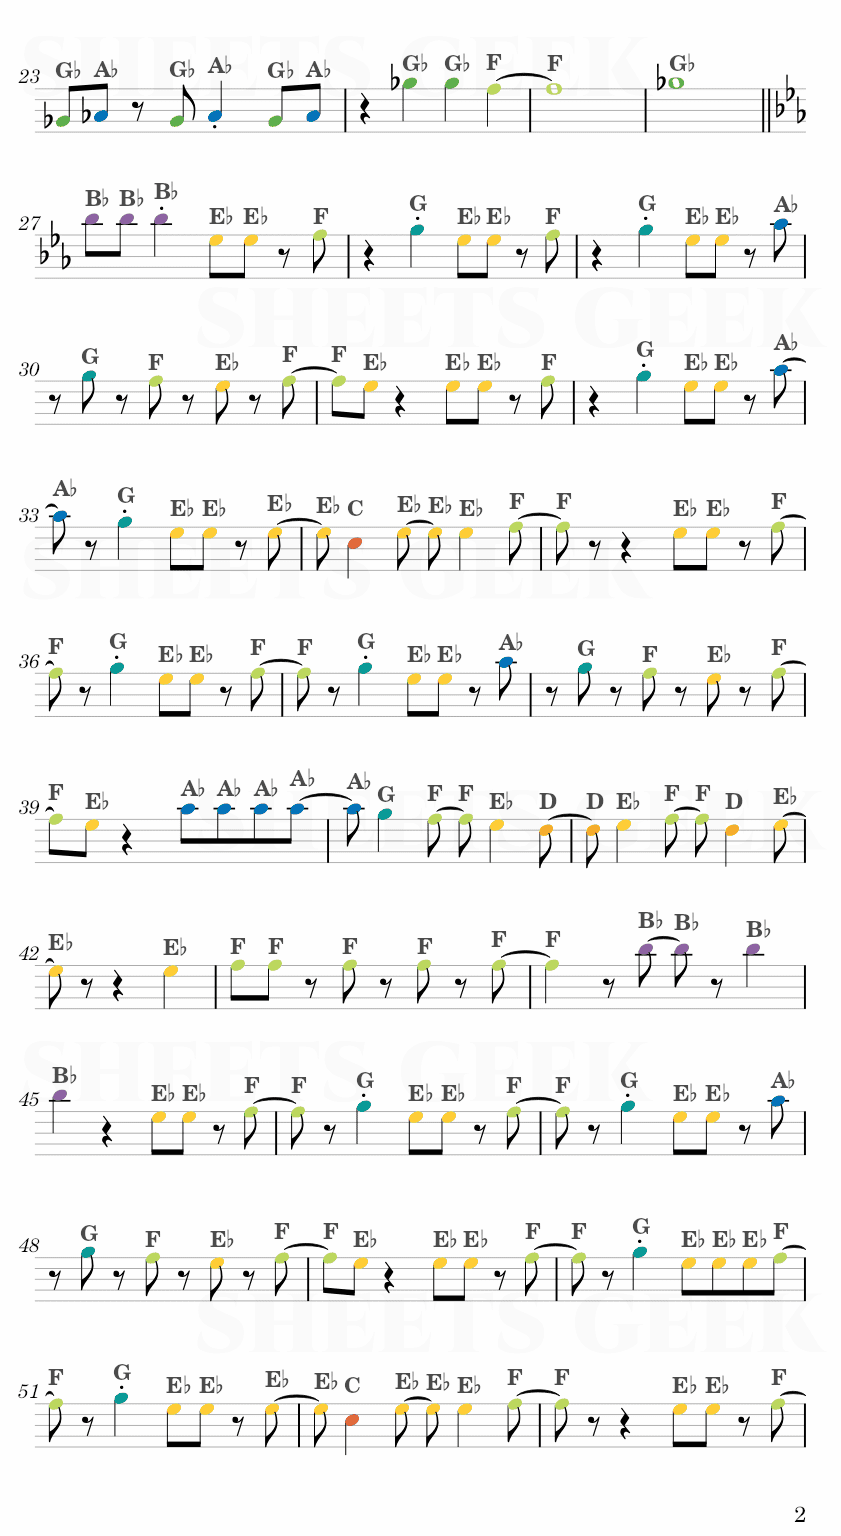 Imagination - Haikyuu!! Opening 1 Easy Sheet Music Free for piano, keyboard, flute, violin, sax, cello page 2